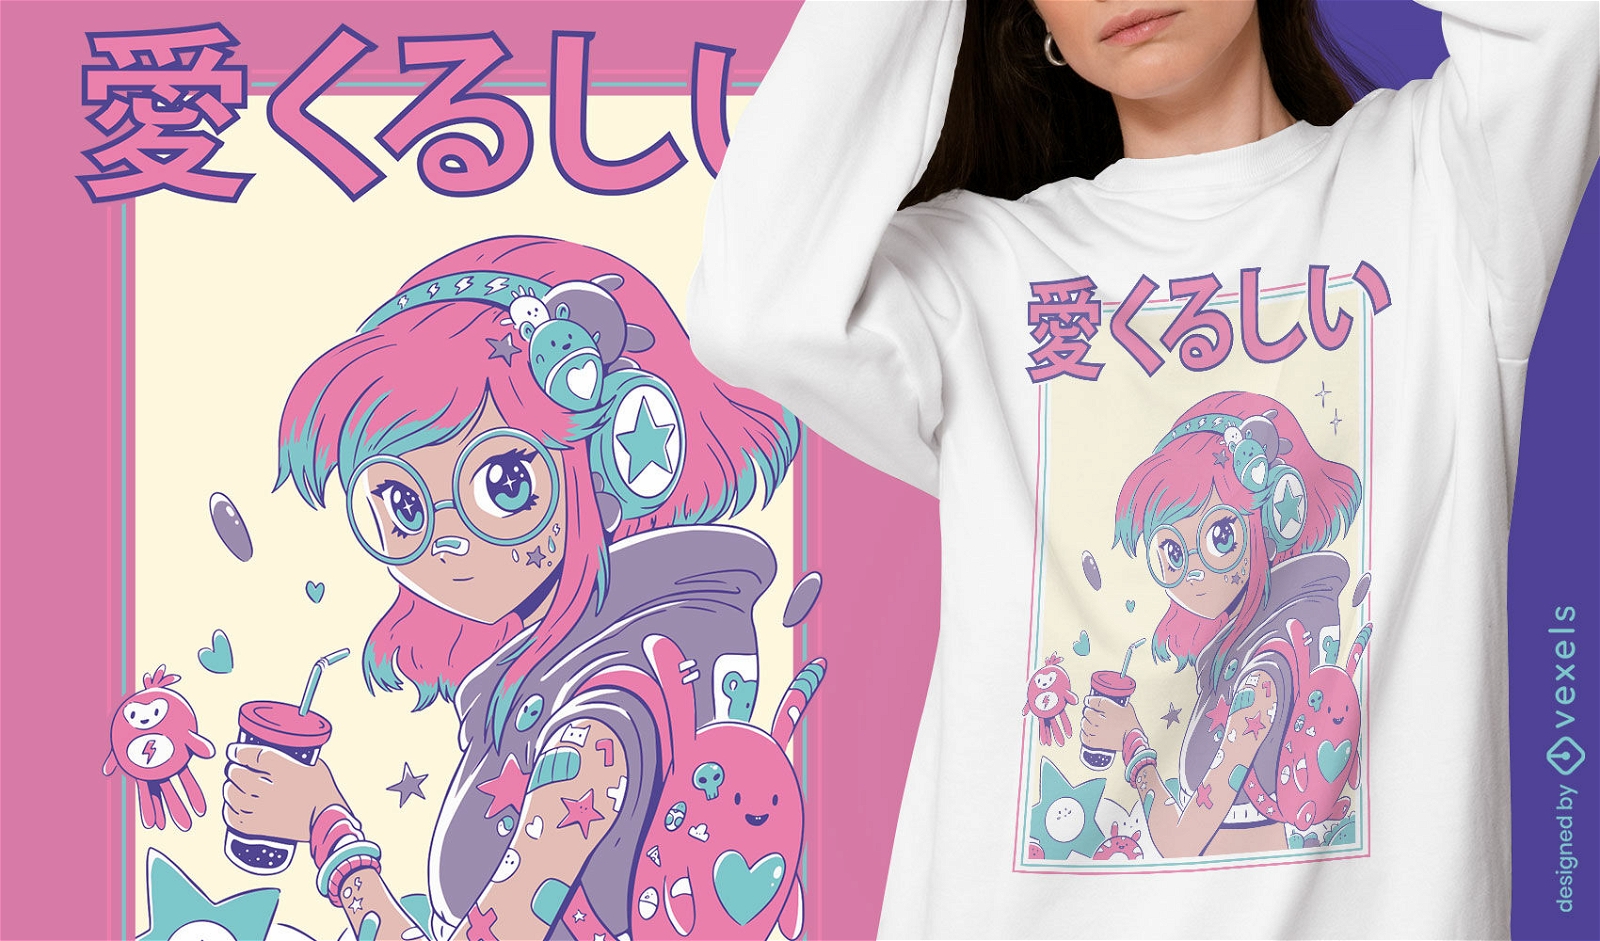 Cute anime girl with glasses t-shirt design